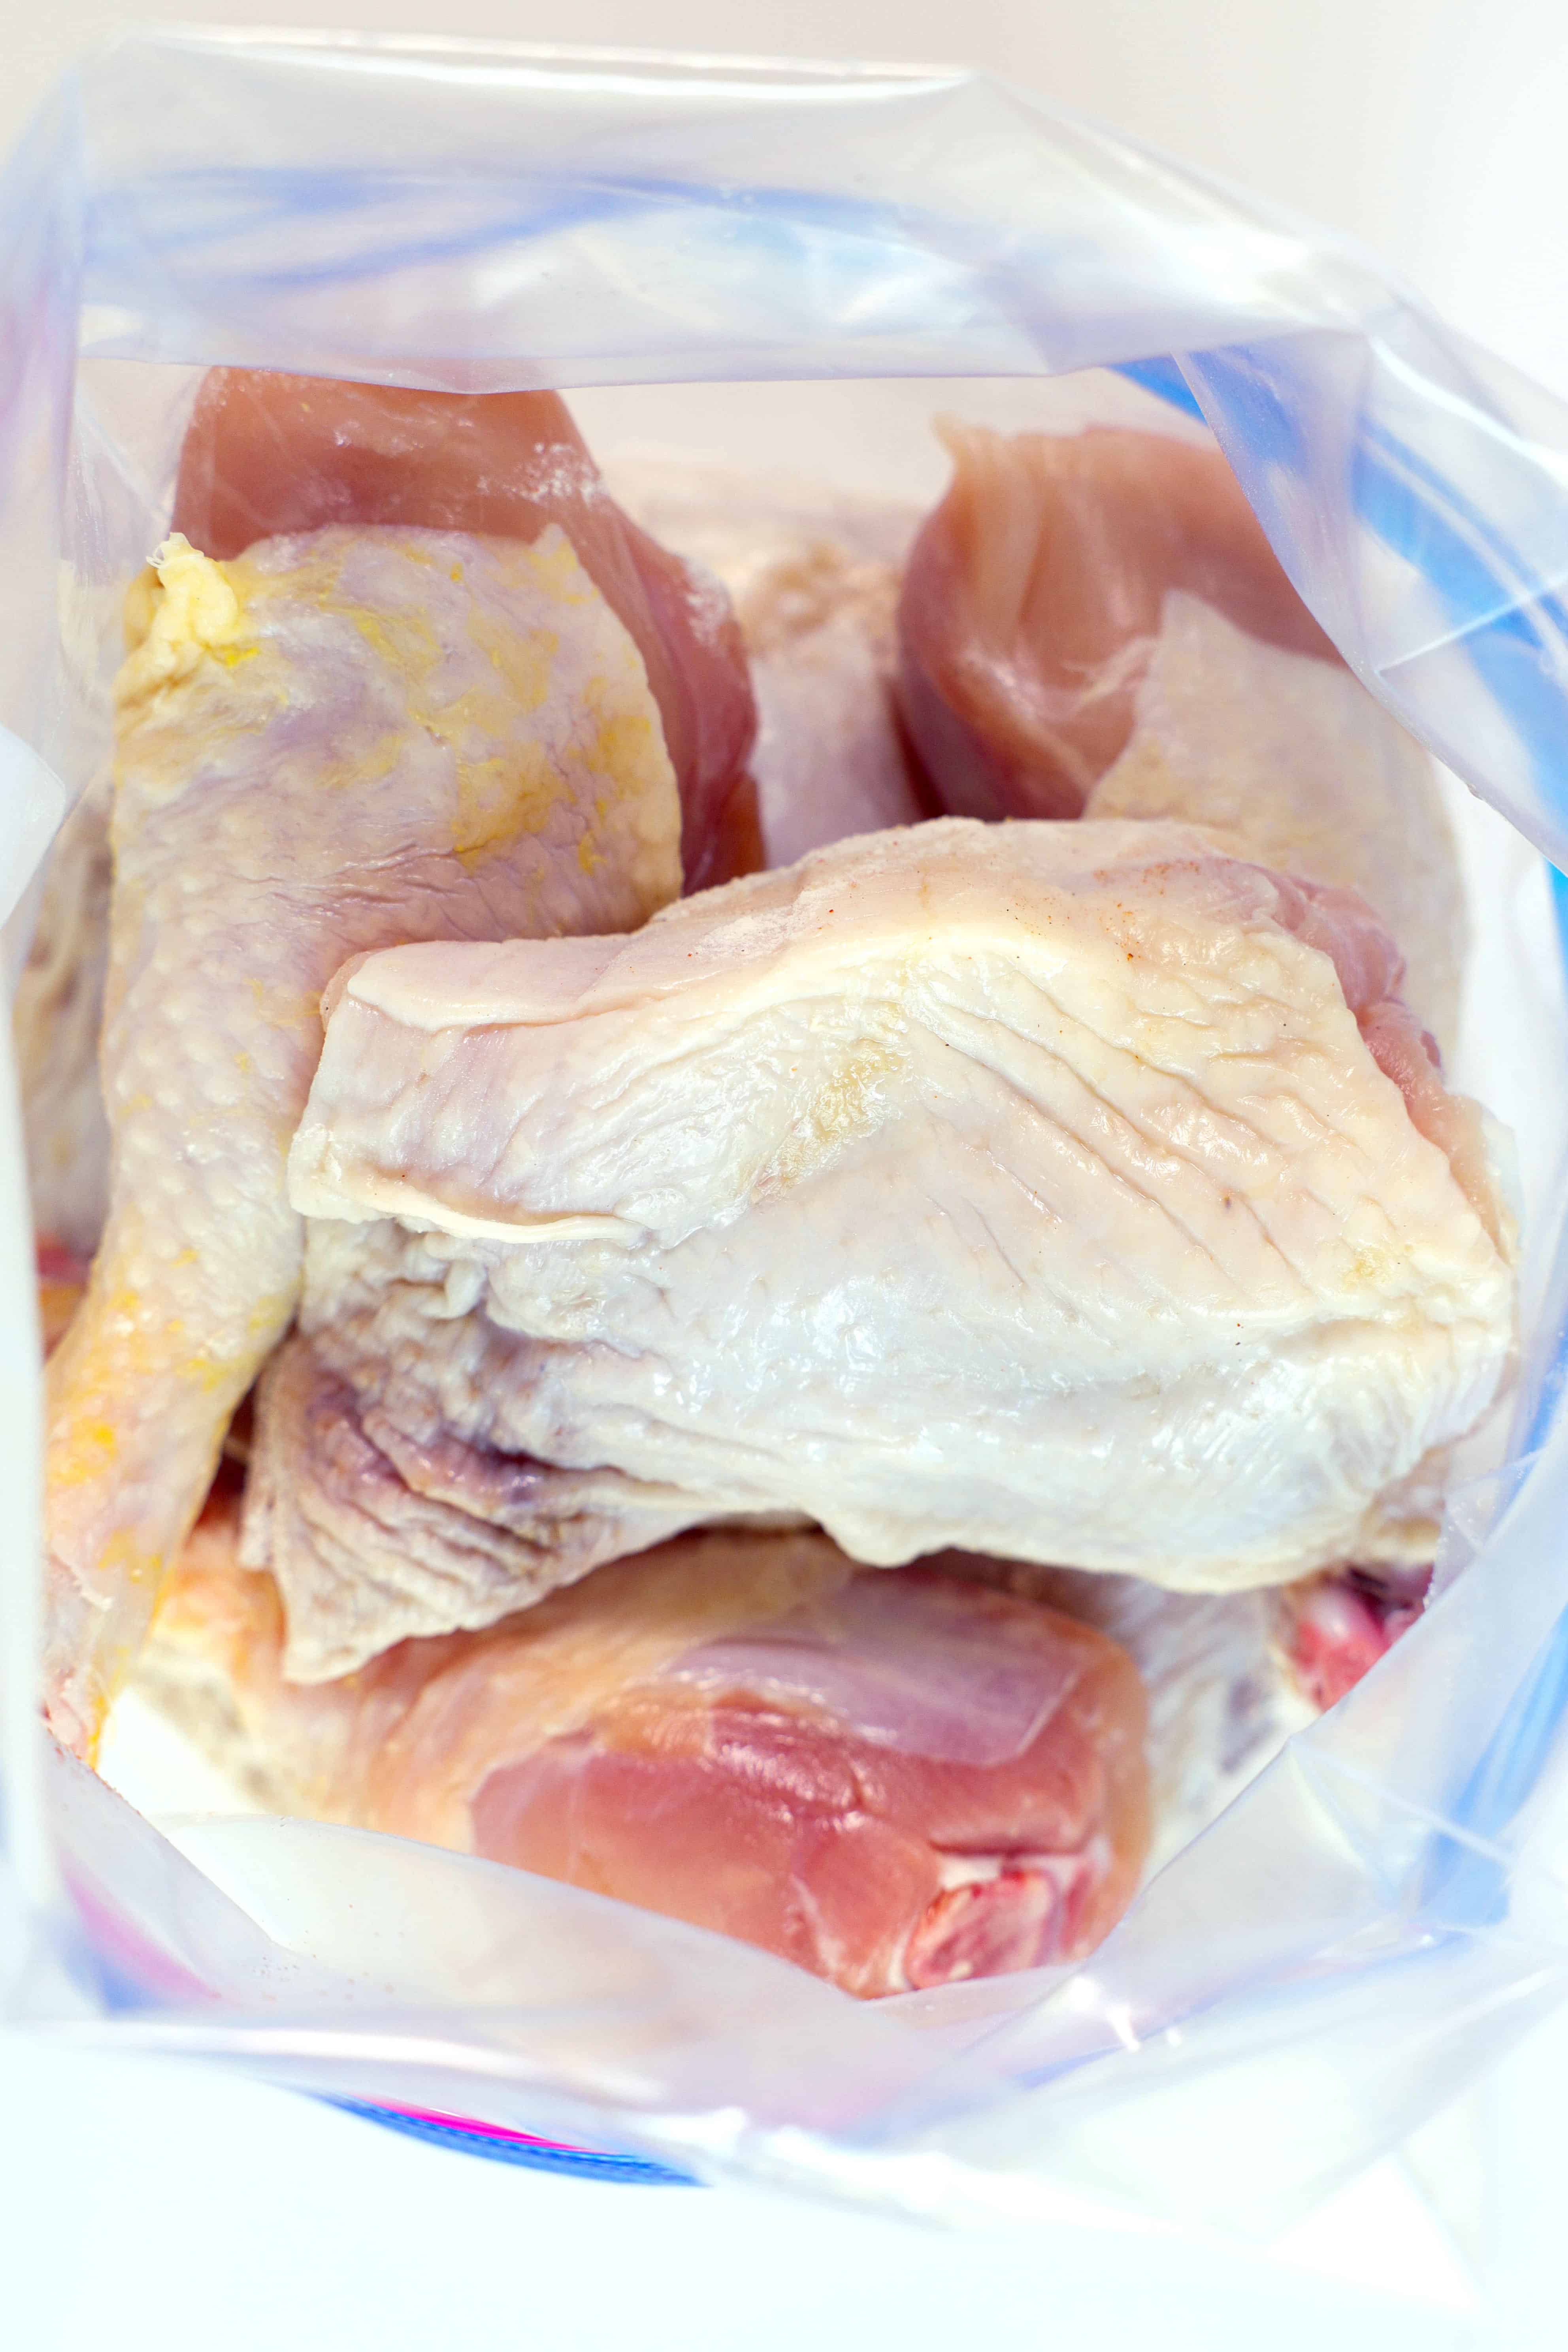 A look down inside a zip-top bag where raw chicken legs and thighs have been added on top of a flour dredge.